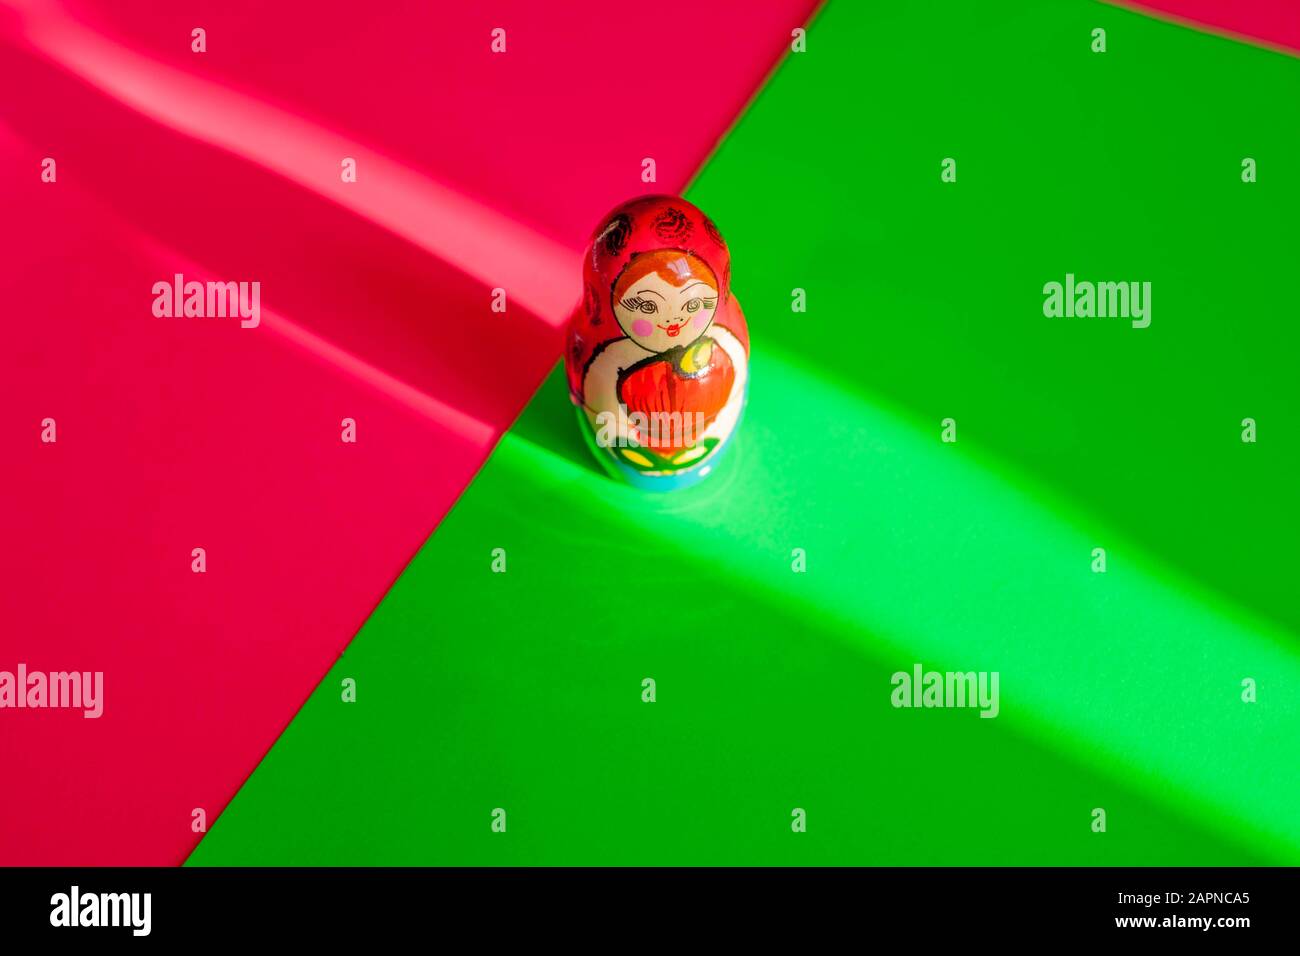 Still life - colourful painted Matryoshka (Russian) doll on a neon pink & green background. Stock Photo